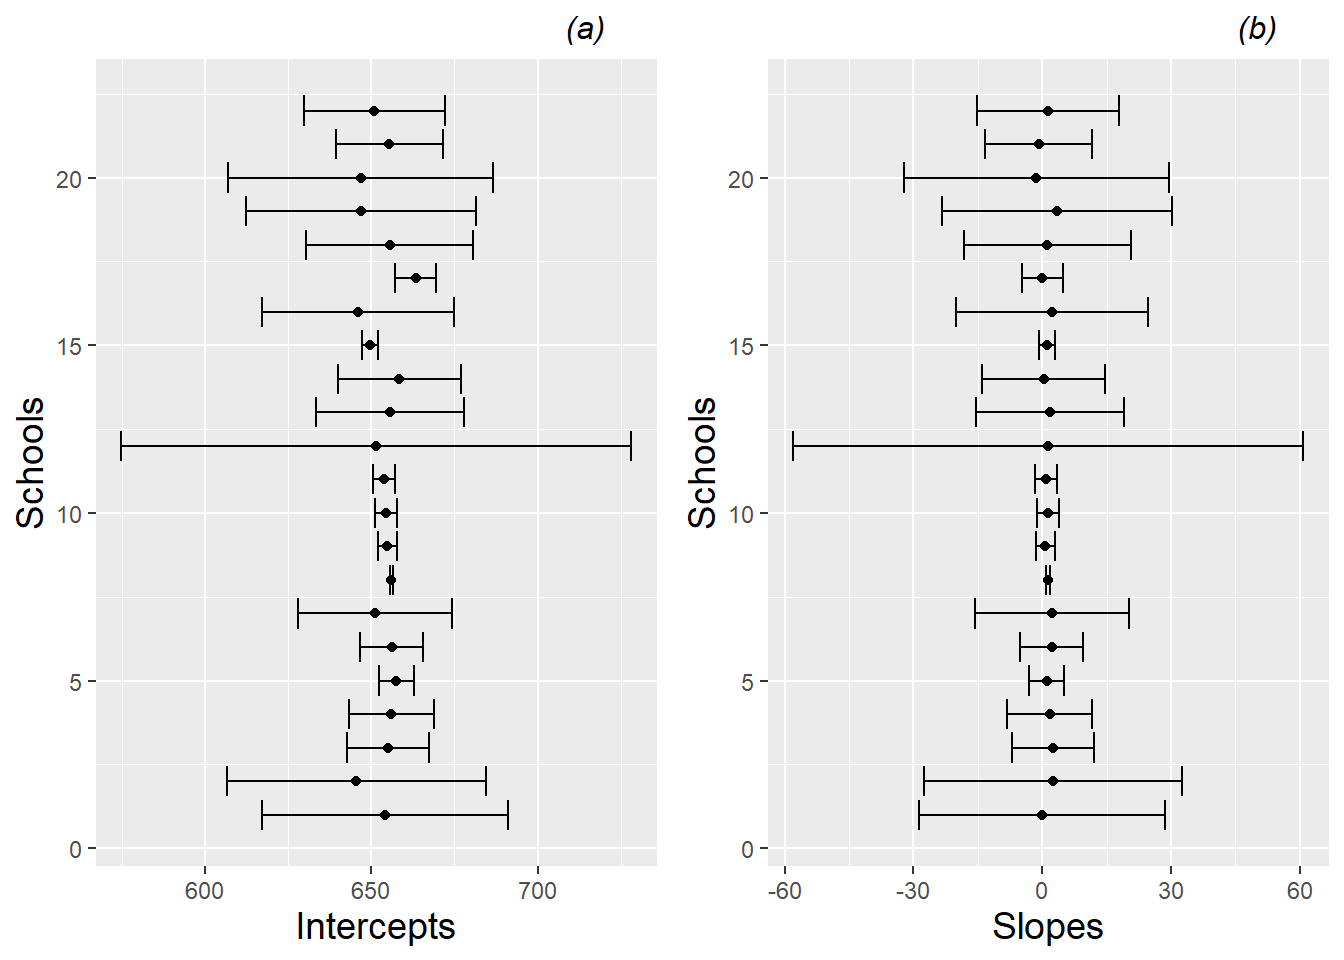 Point estimates and 95% confidence intervals for (a) intercepts and (b) slopes by school, for the first 24 schools in the data set.